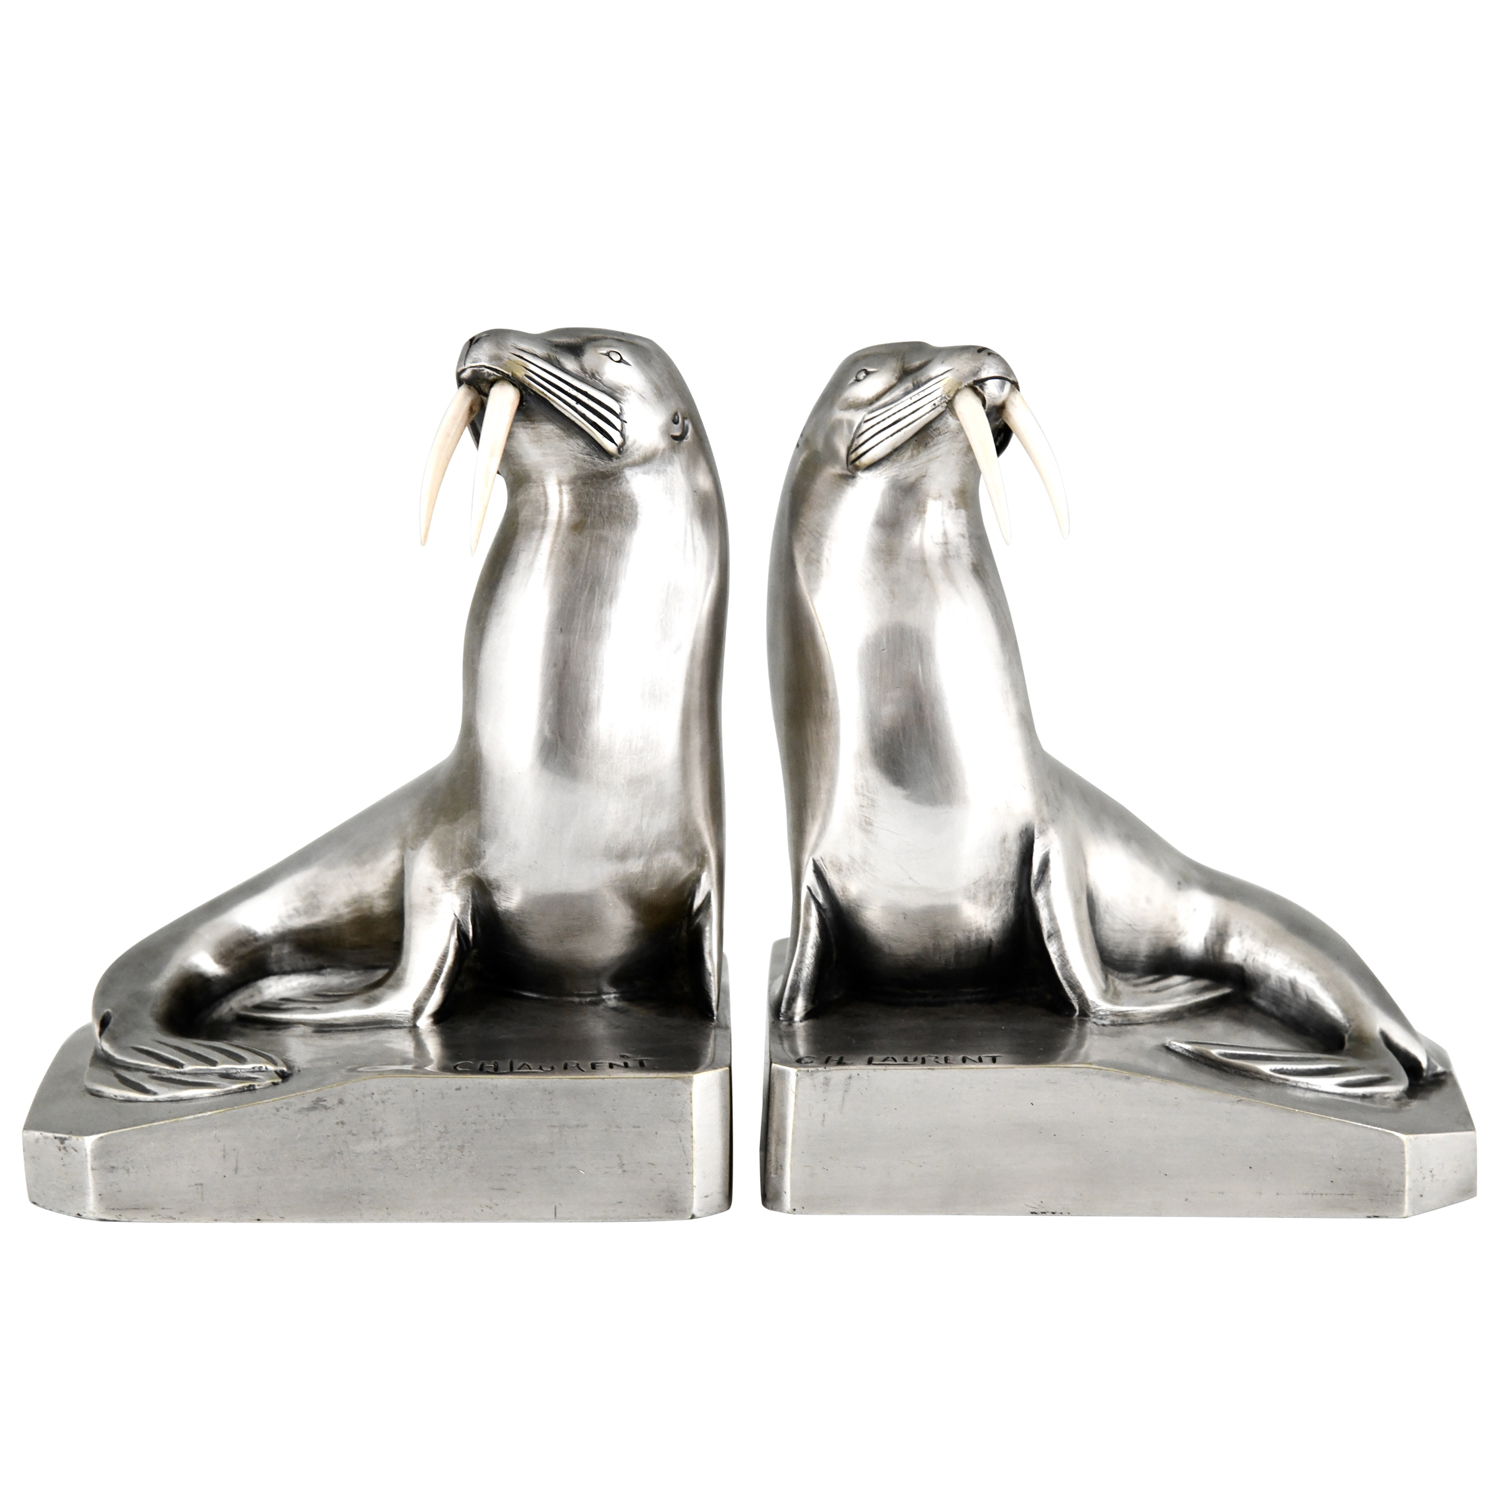 Art Deco silvered bronze walrus bookends by G.H. Laurent - 1